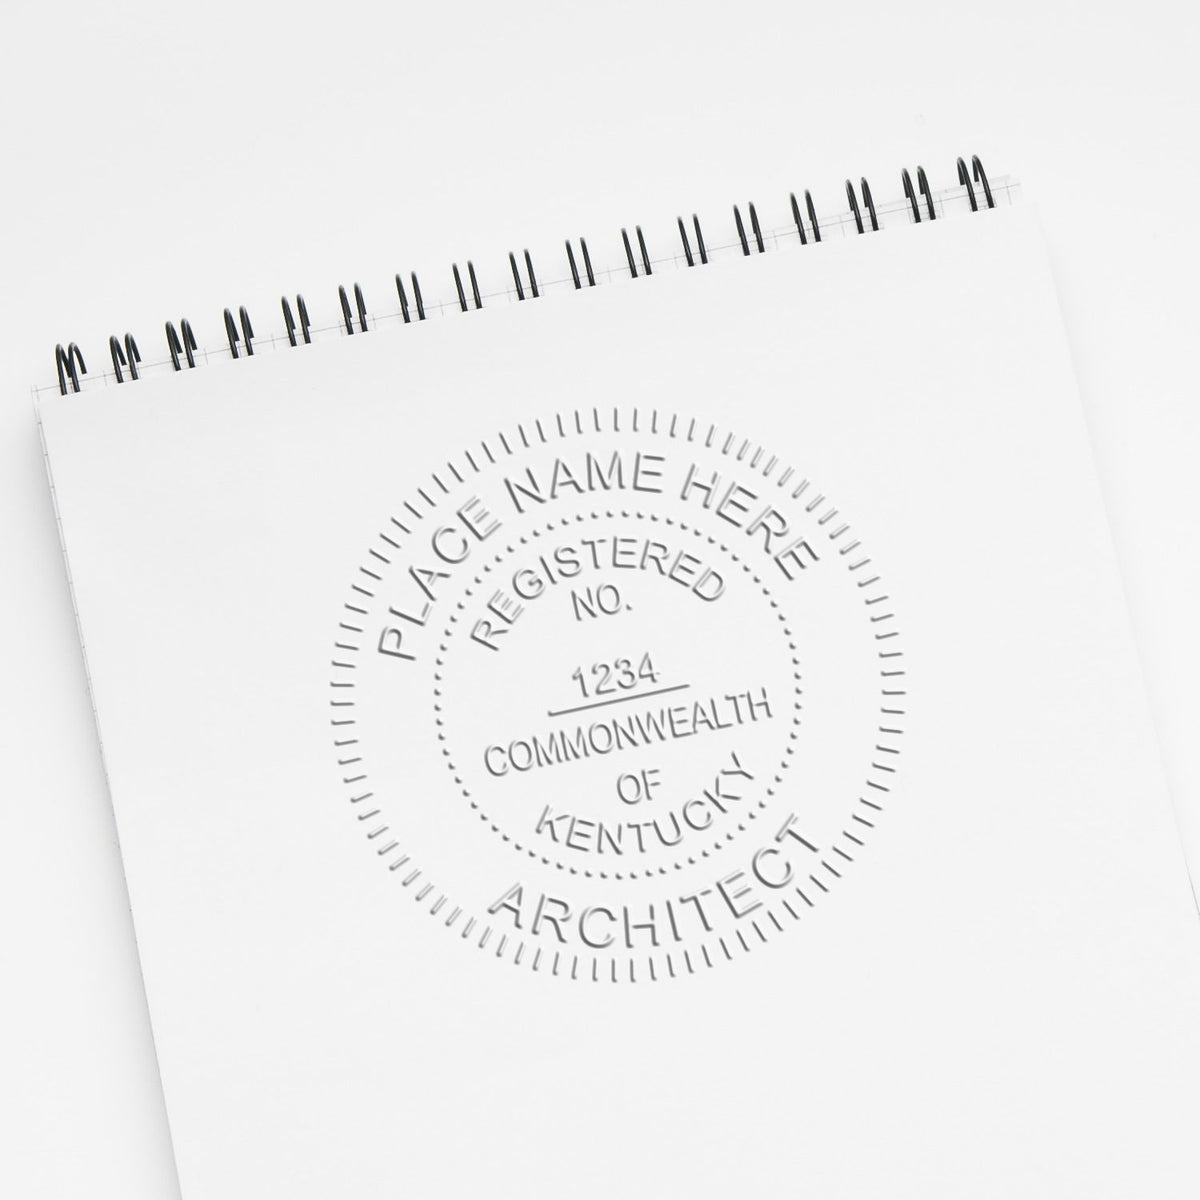 The Kentucky Desk Architect Embossing Seal stamp impression comes to life with a crisp, detailed photo on paper - showcasing true professional quality.